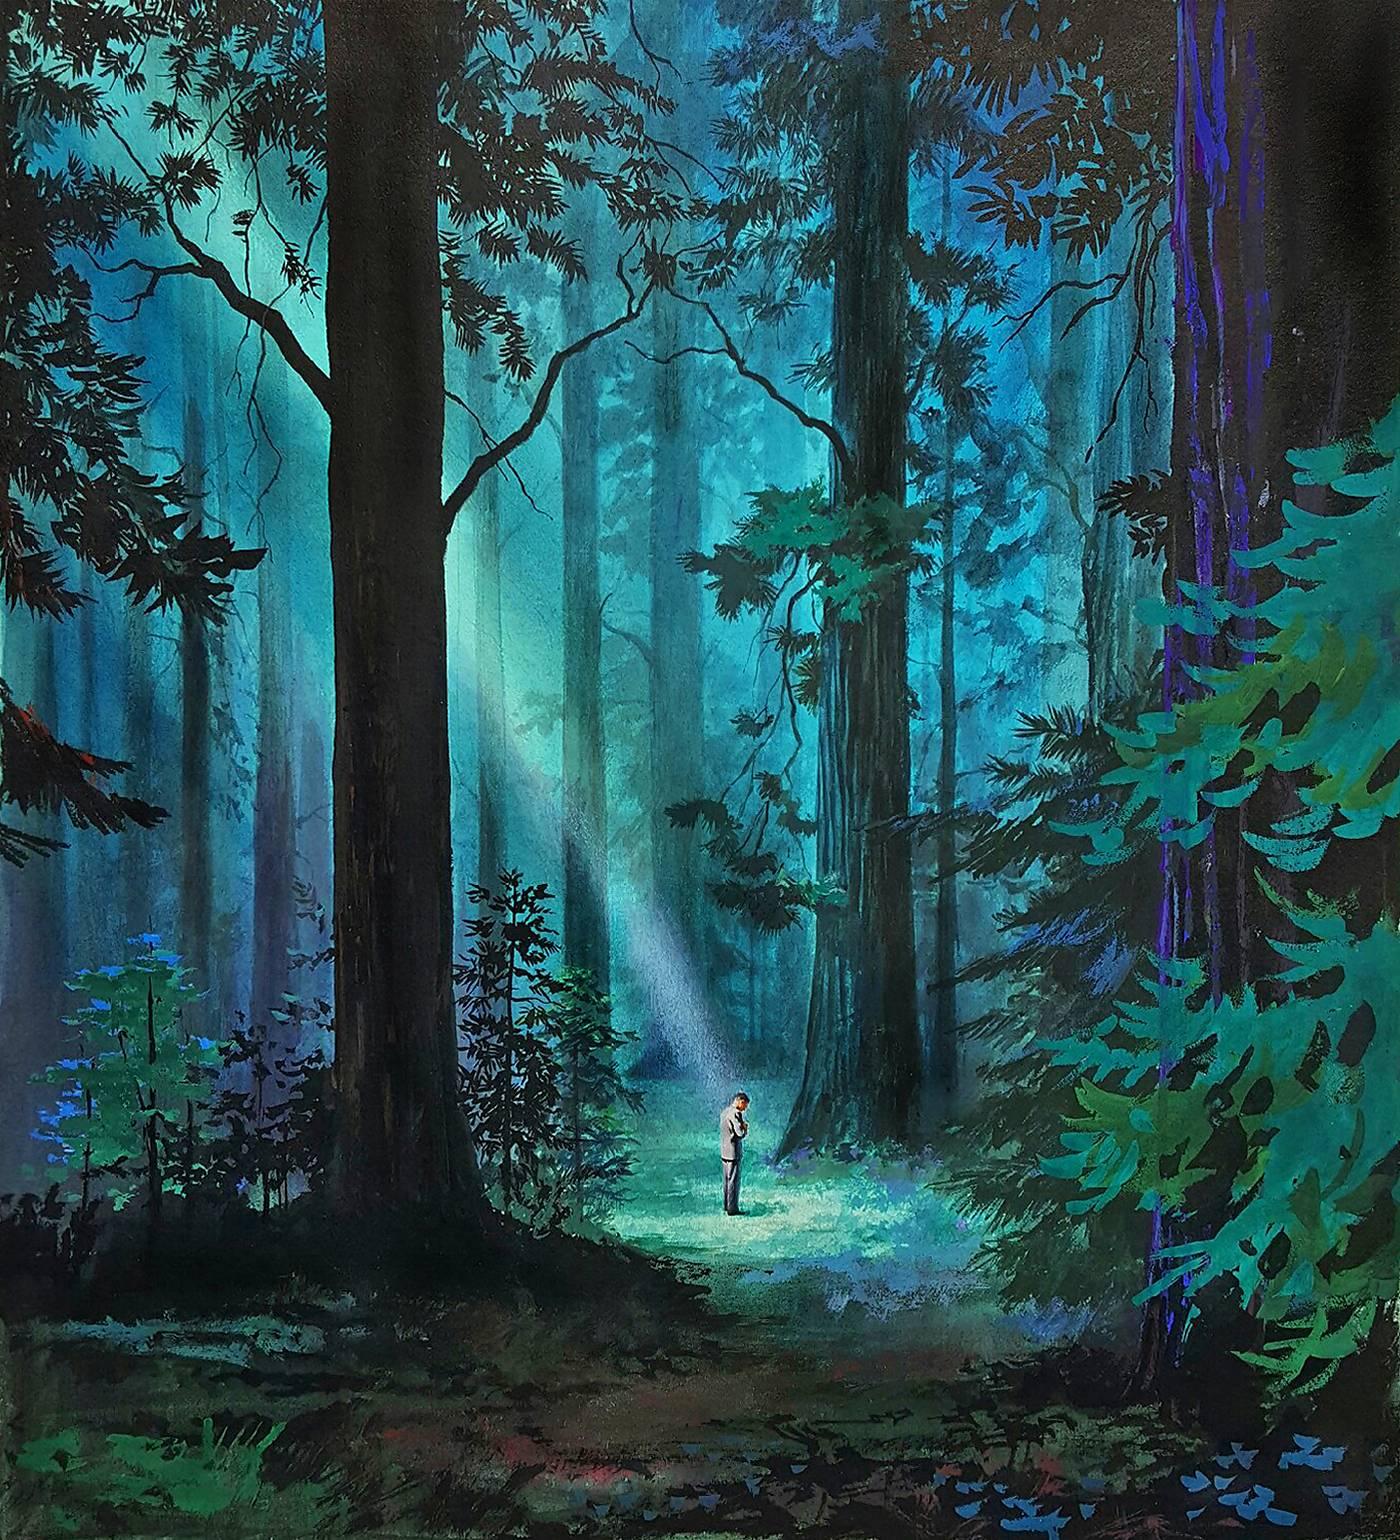 A ray of light in the forest - Solitary Man Surreal Landscape 